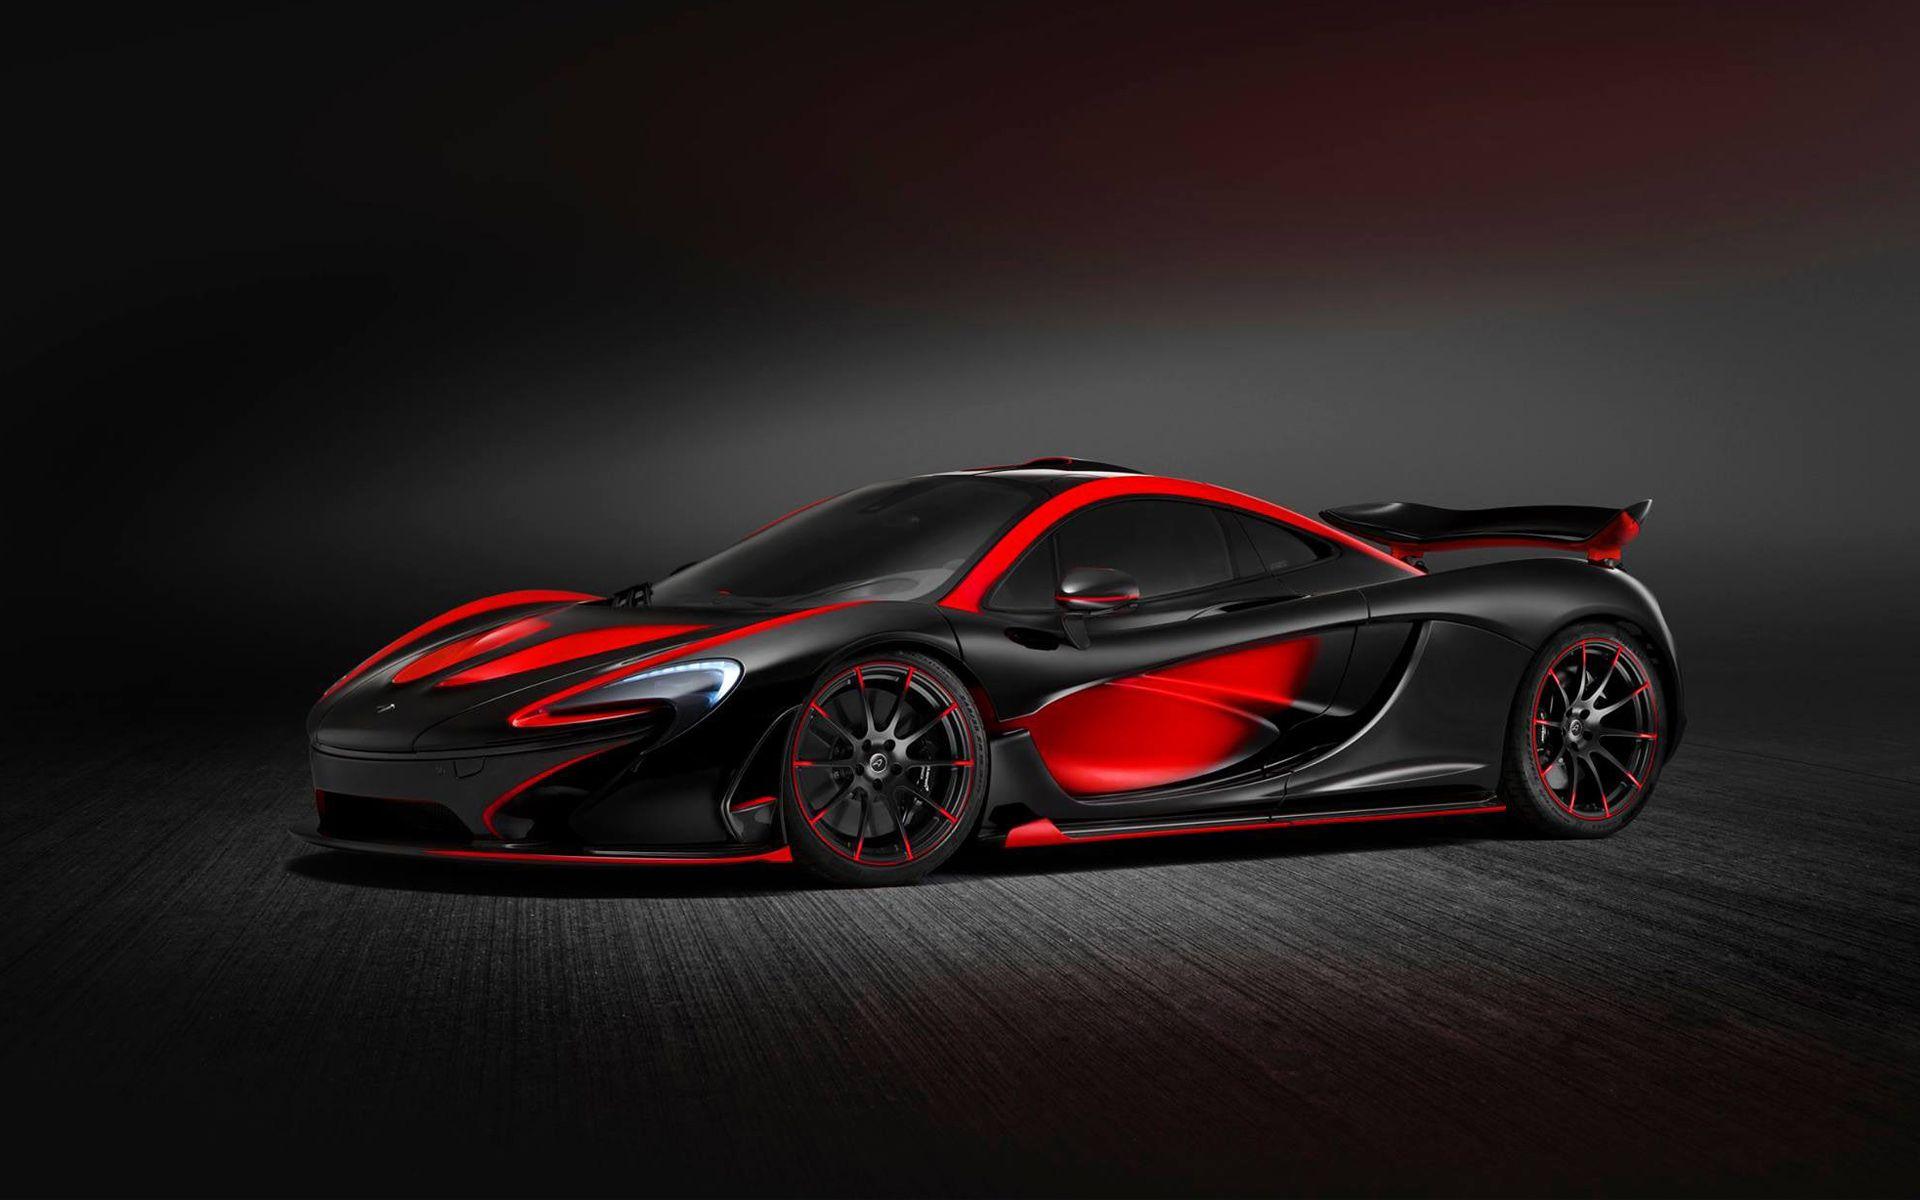 13+ Car Wallpapers Hd 1920x1080 Black Red free download